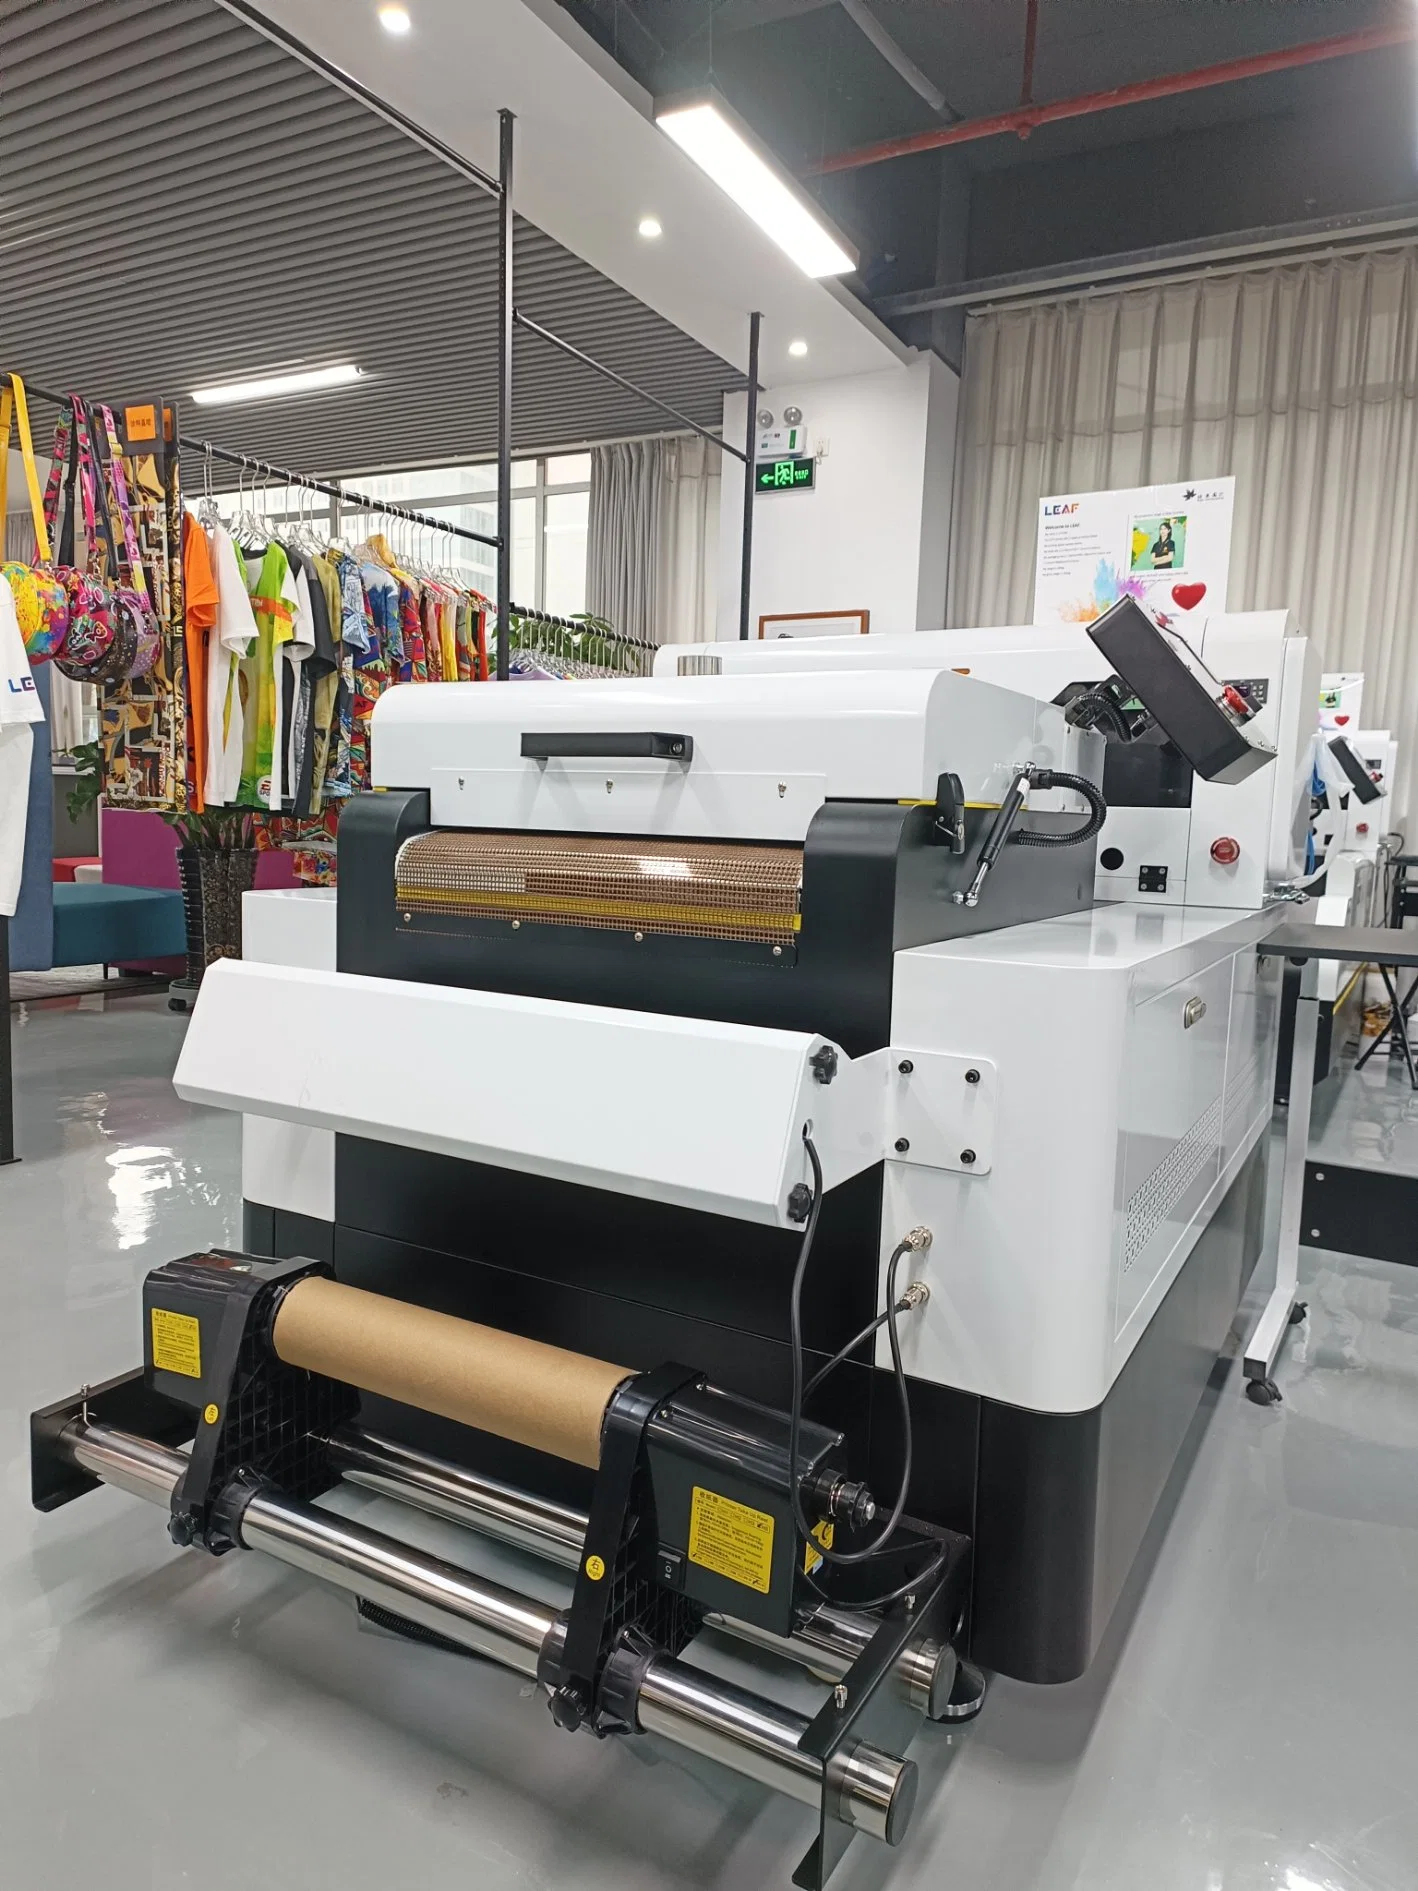 LEAF Dtf printer A3 digital Textile printing All in one machine for T shirt printing